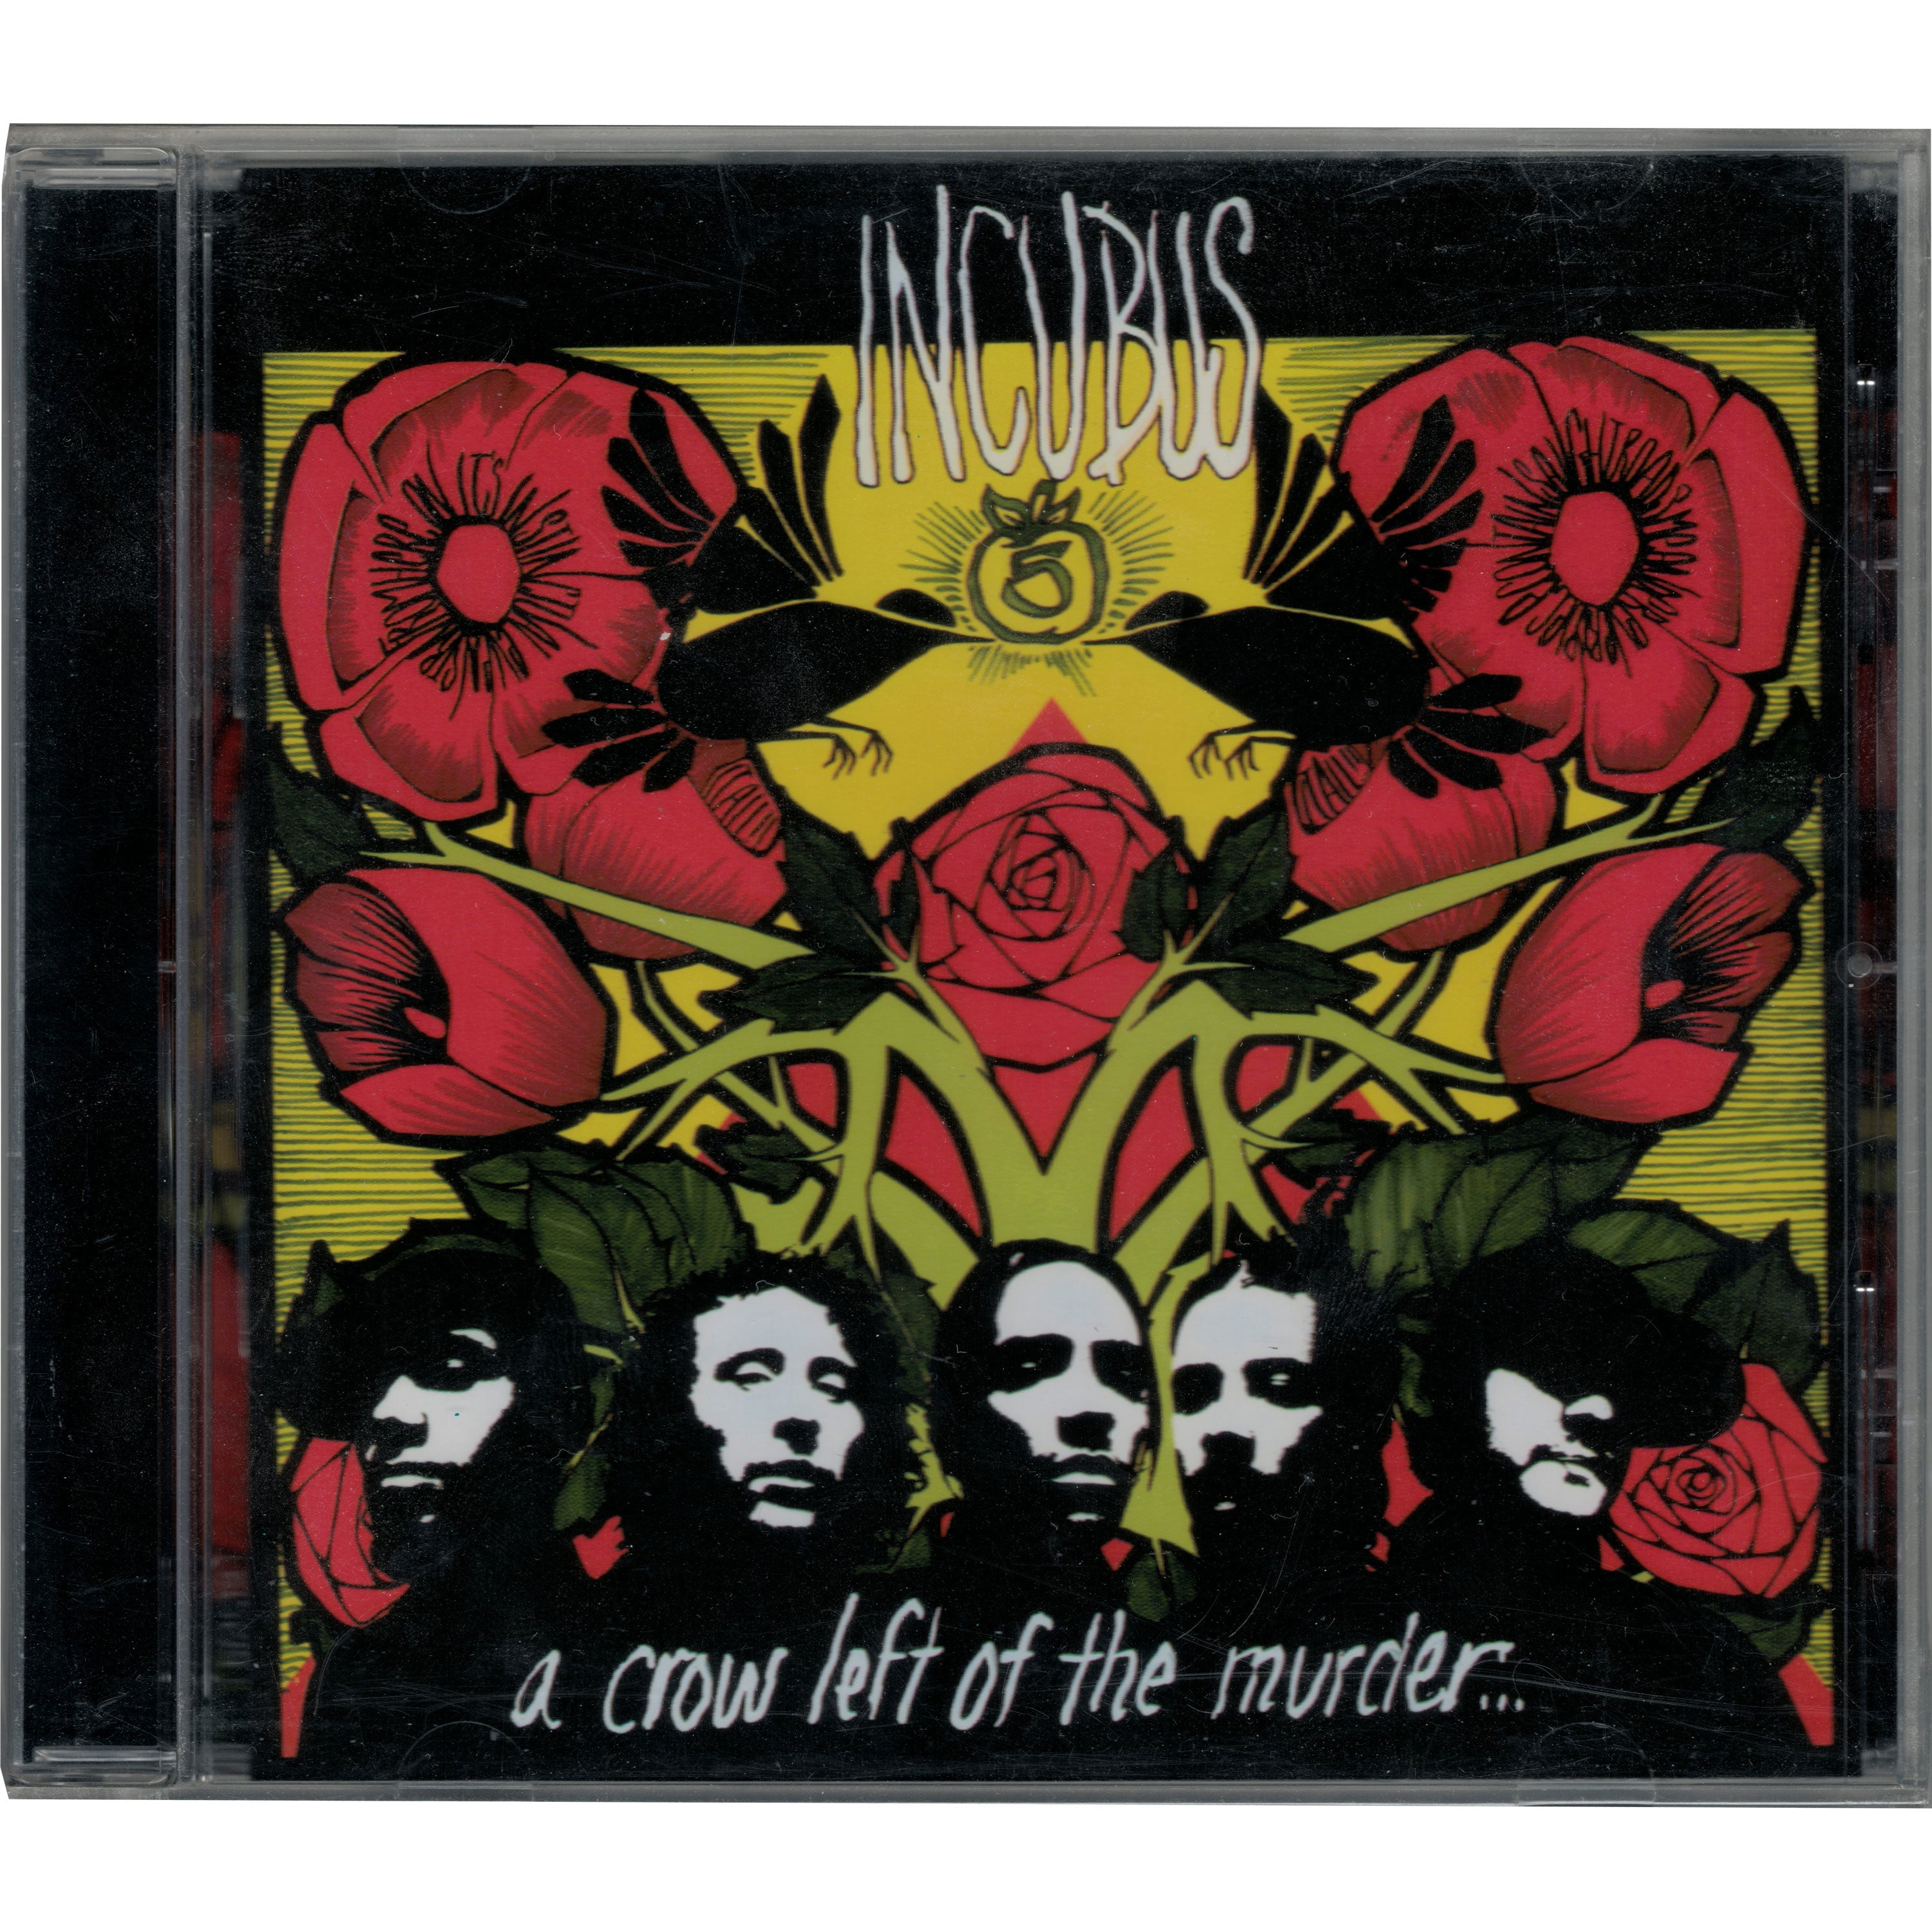 A Crow Left of the Murder - Incubus CD / Unopened / New condition